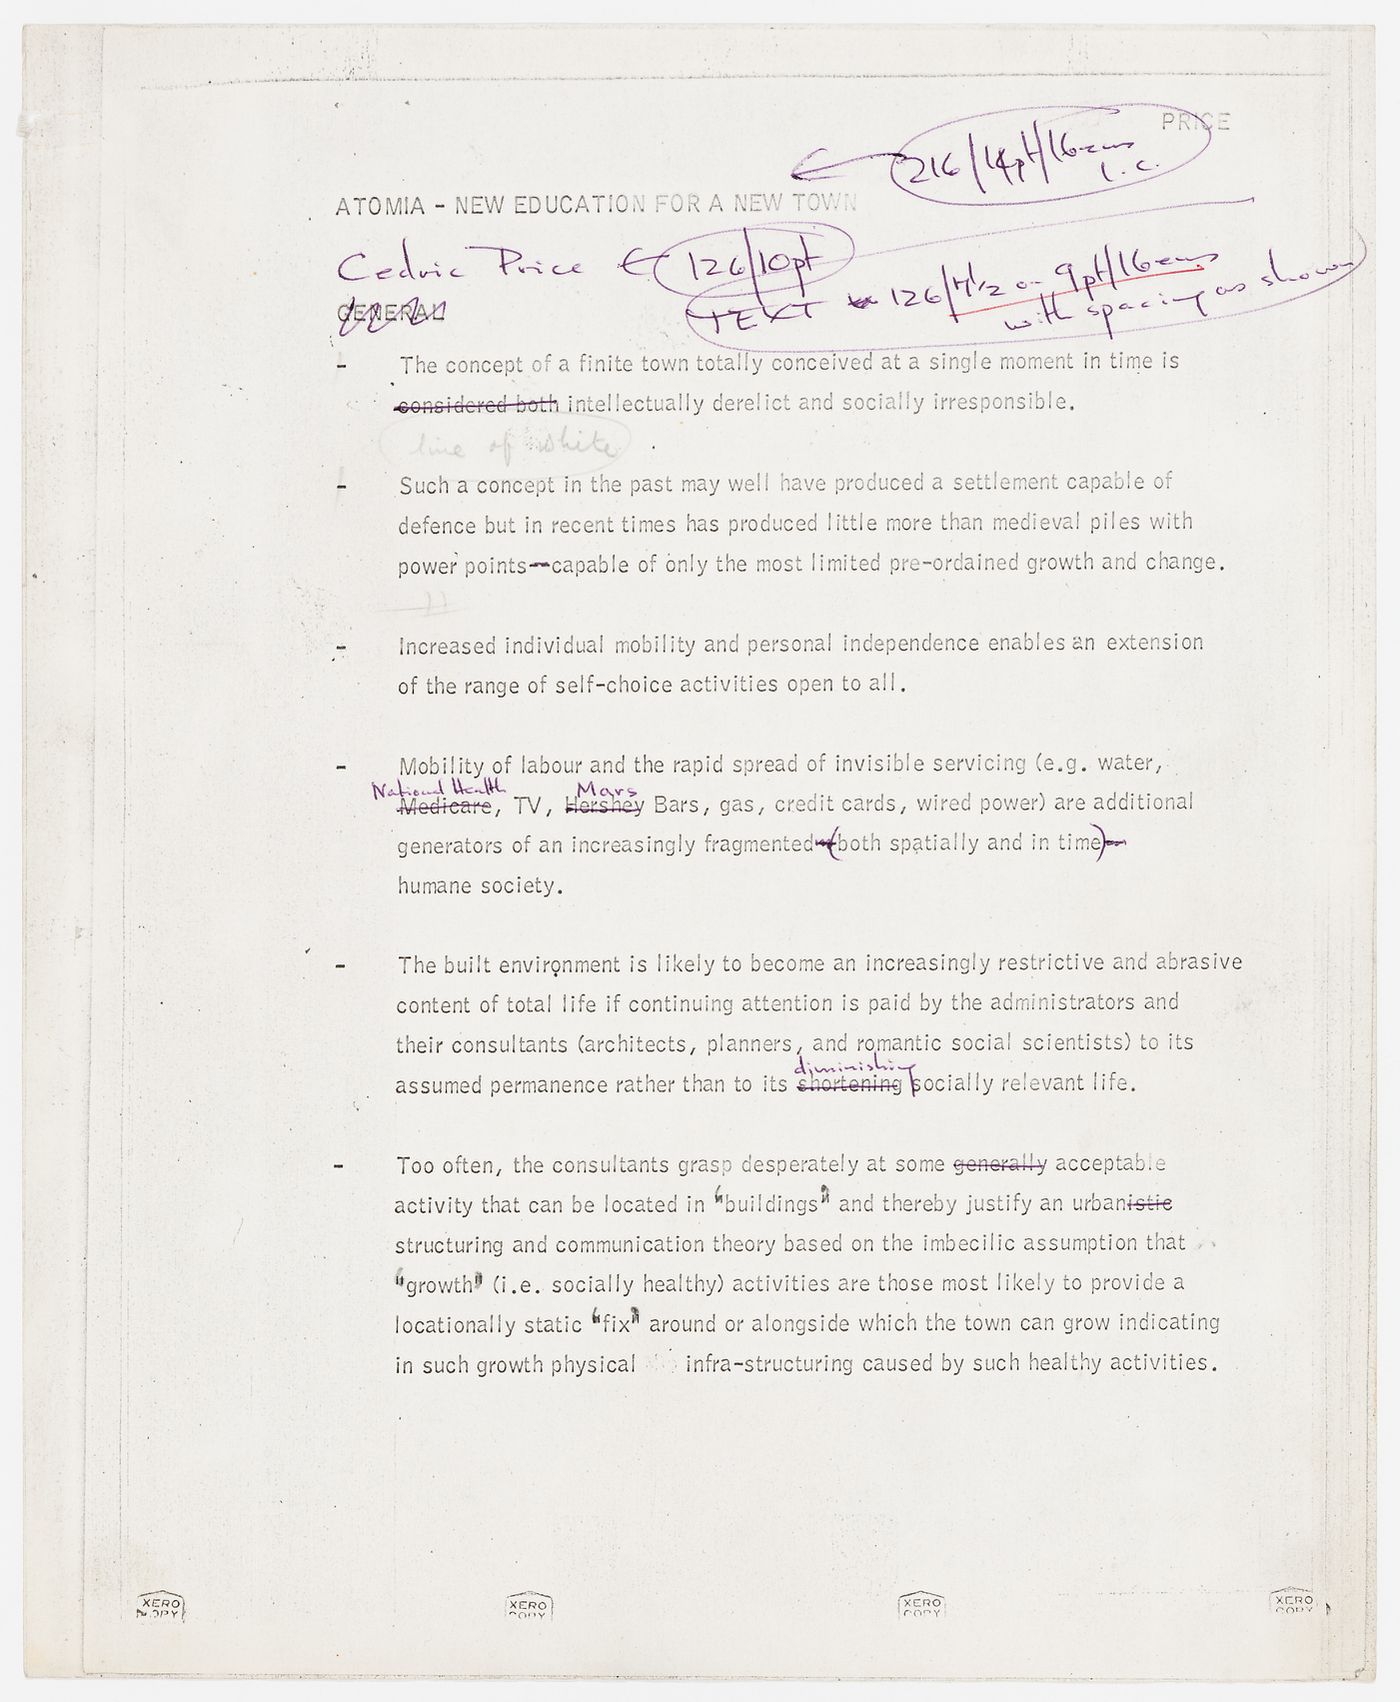 Atomia: new education for a new town (draft, page 1) (document from the Atom project records)